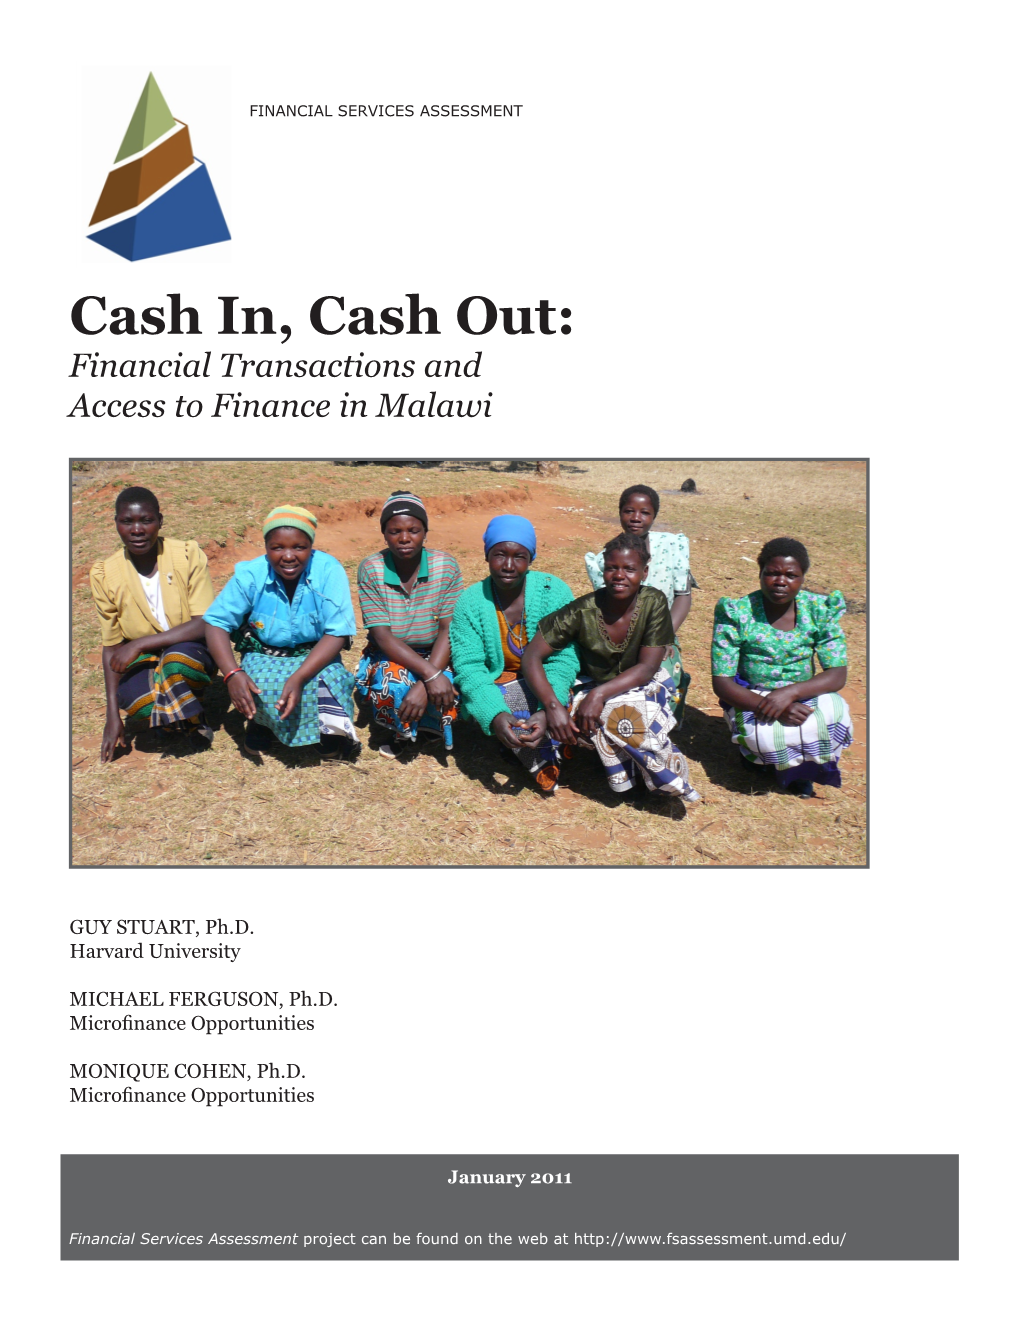 Cash In, Cash Out: Financial Transactions and Access to Finance in Malawi